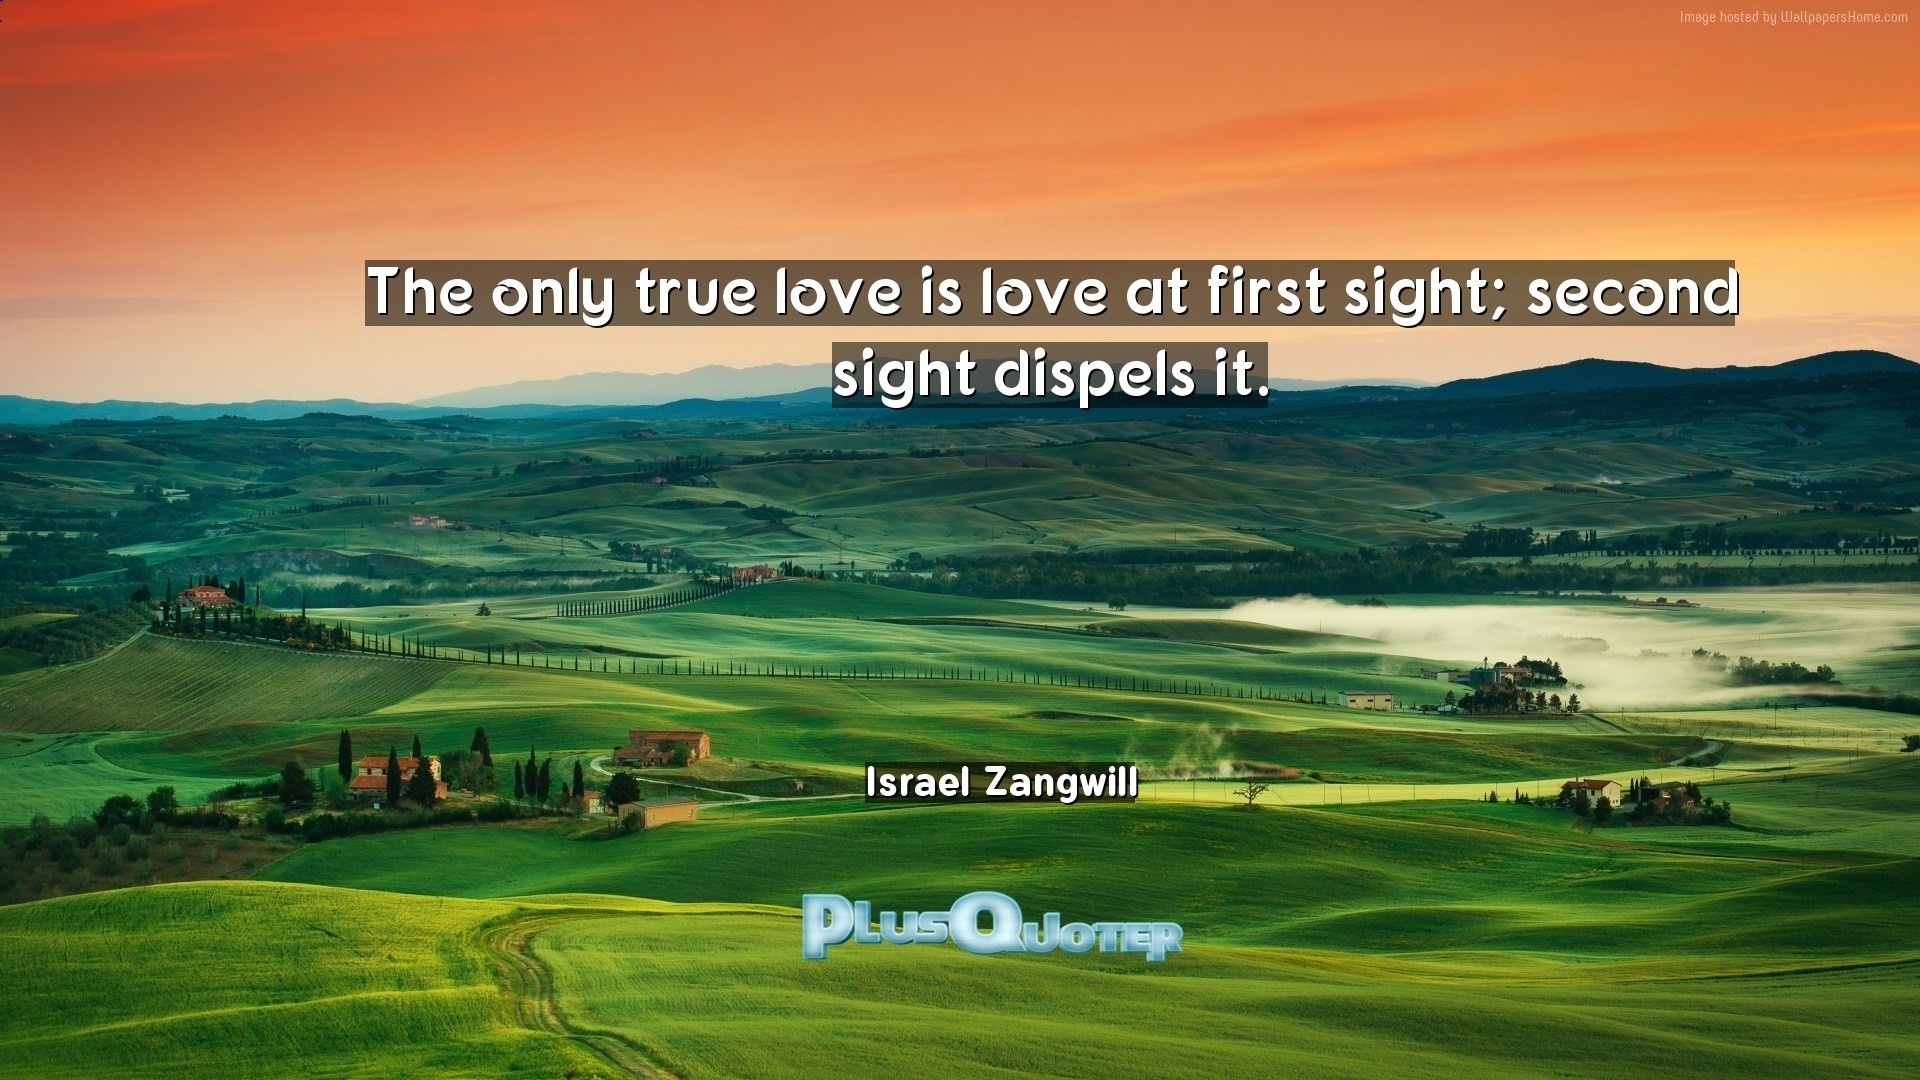 1920x1080 Download Wallpaper with inspirational Quotes- "The only true love is love  at first sight